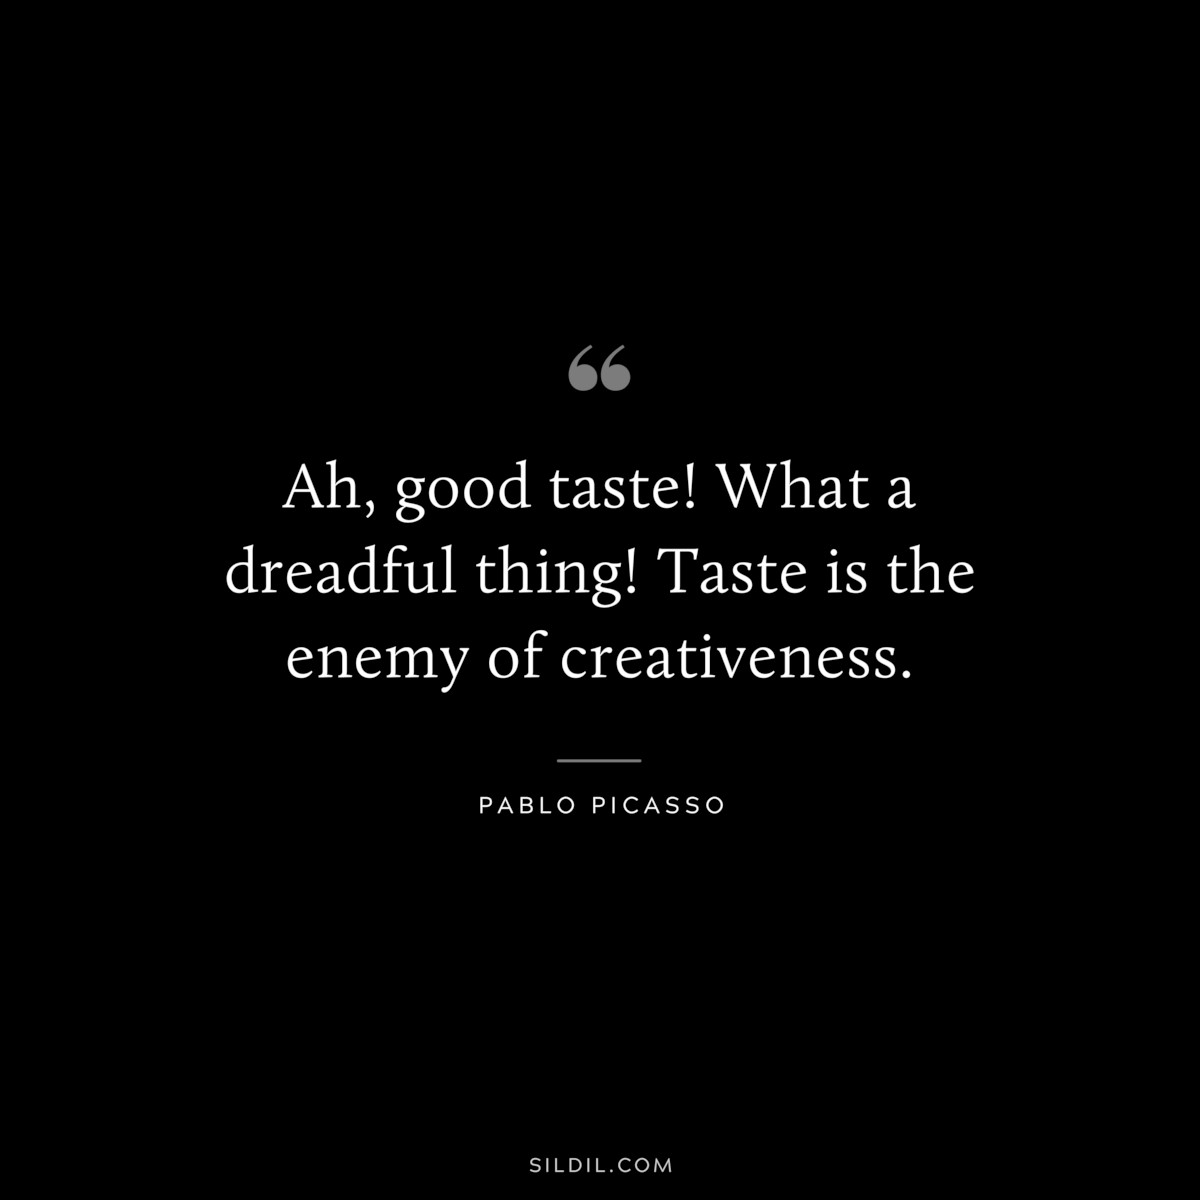 Ah, good taste! What a dreadful thing! Taste is the enemy of creativeness. ― Pablo Picasso